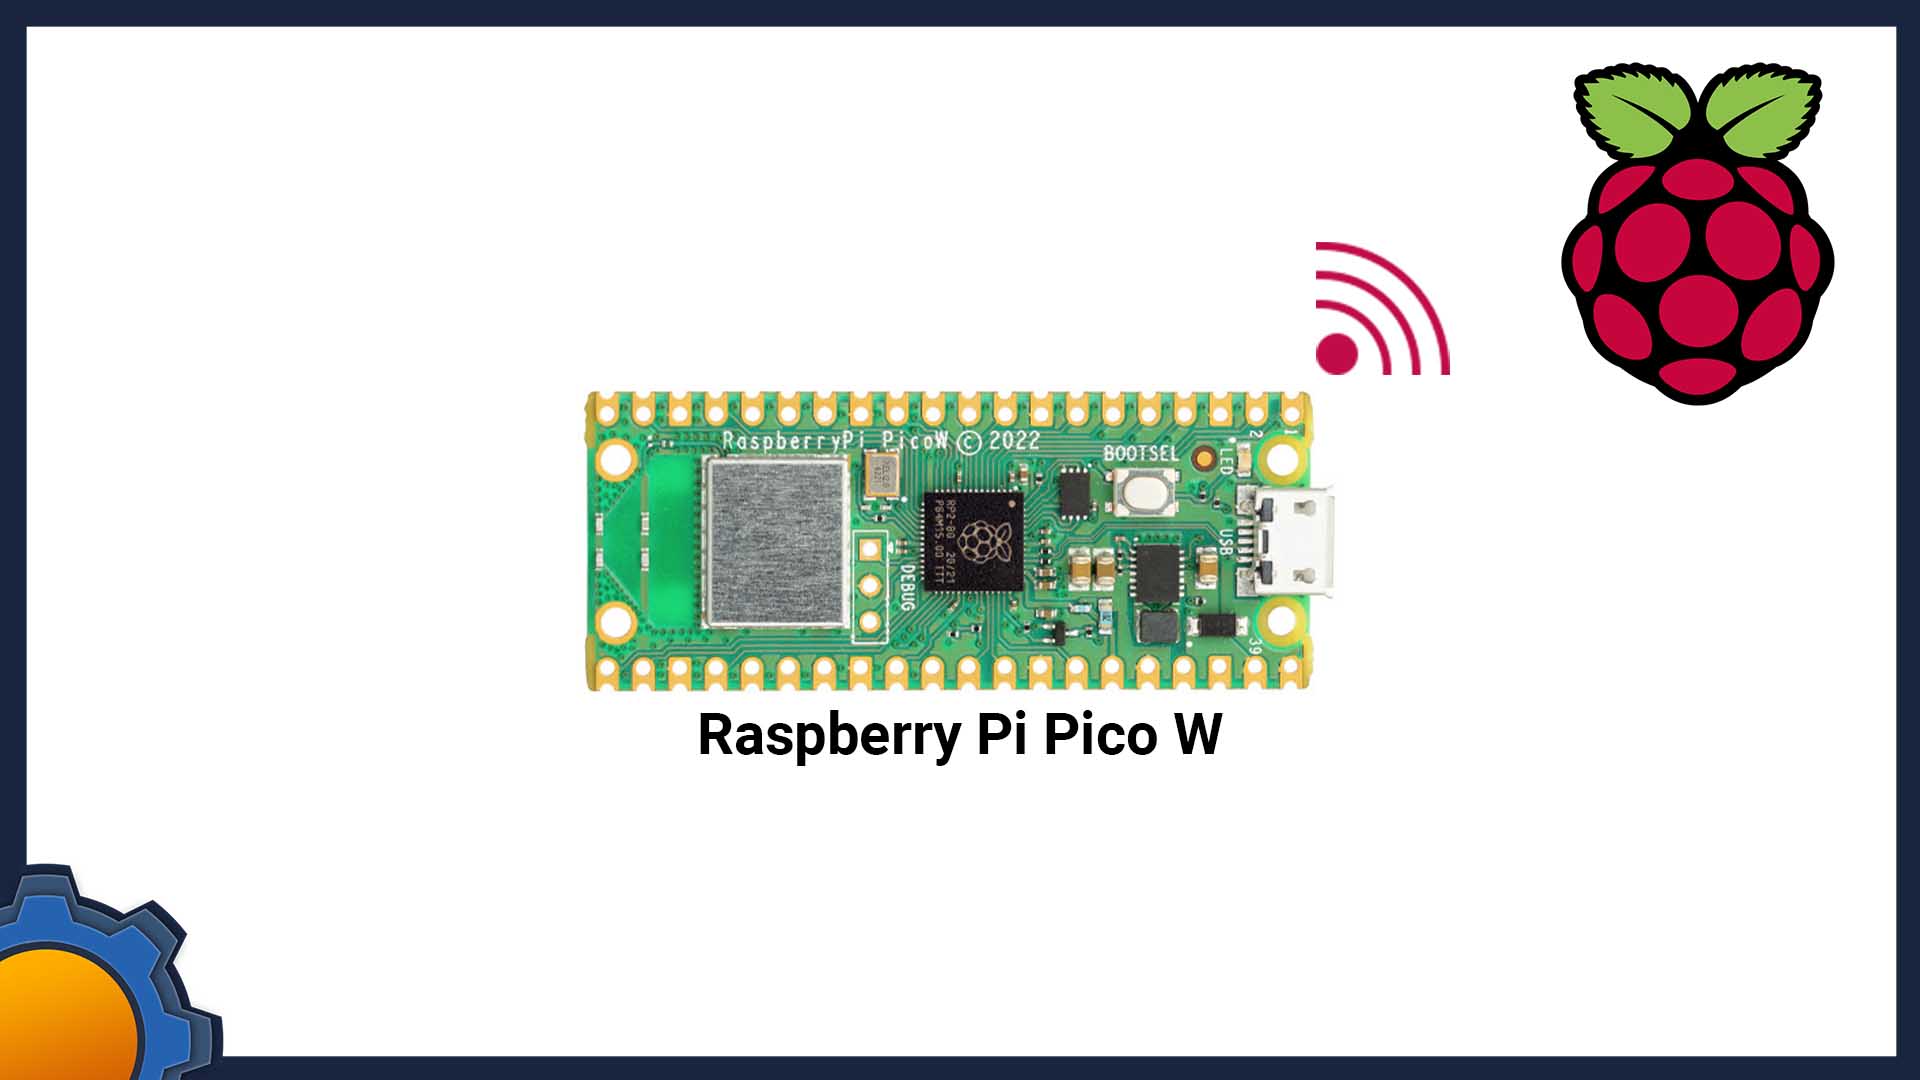 The new Raspberry Pi Pico W is just $6 